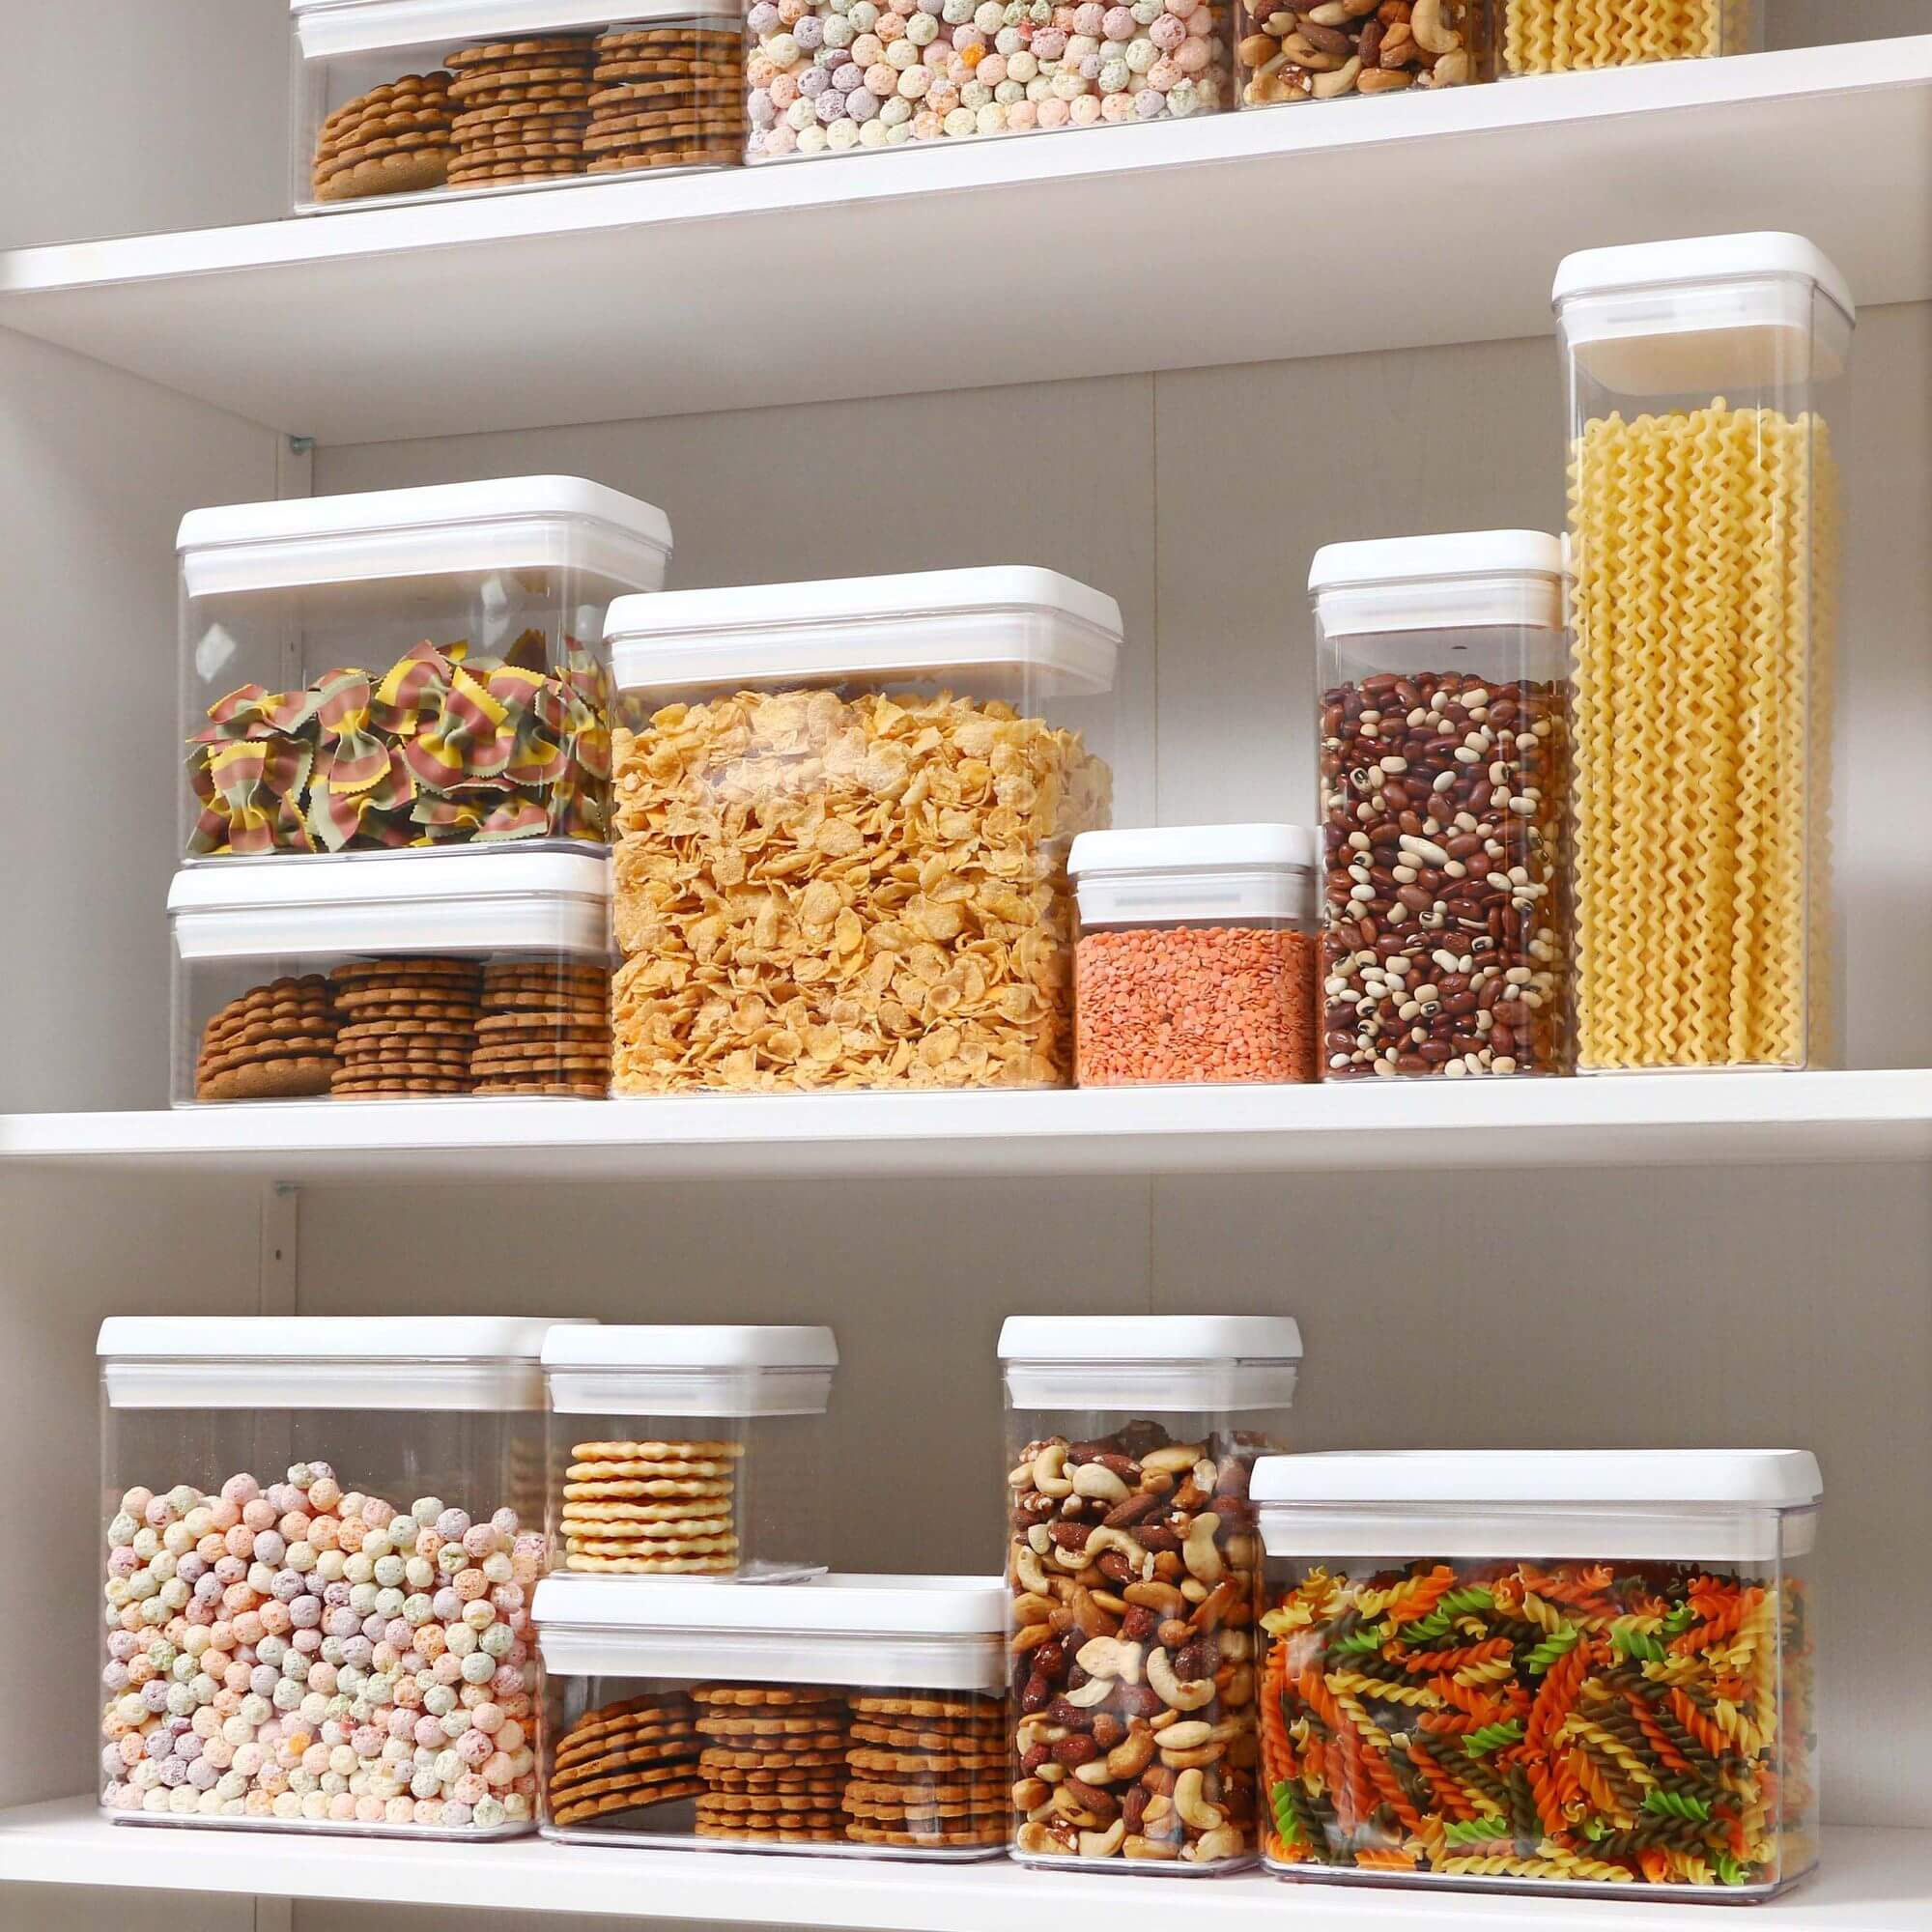 Felli Flip Tite food containers in a kitchen pantry